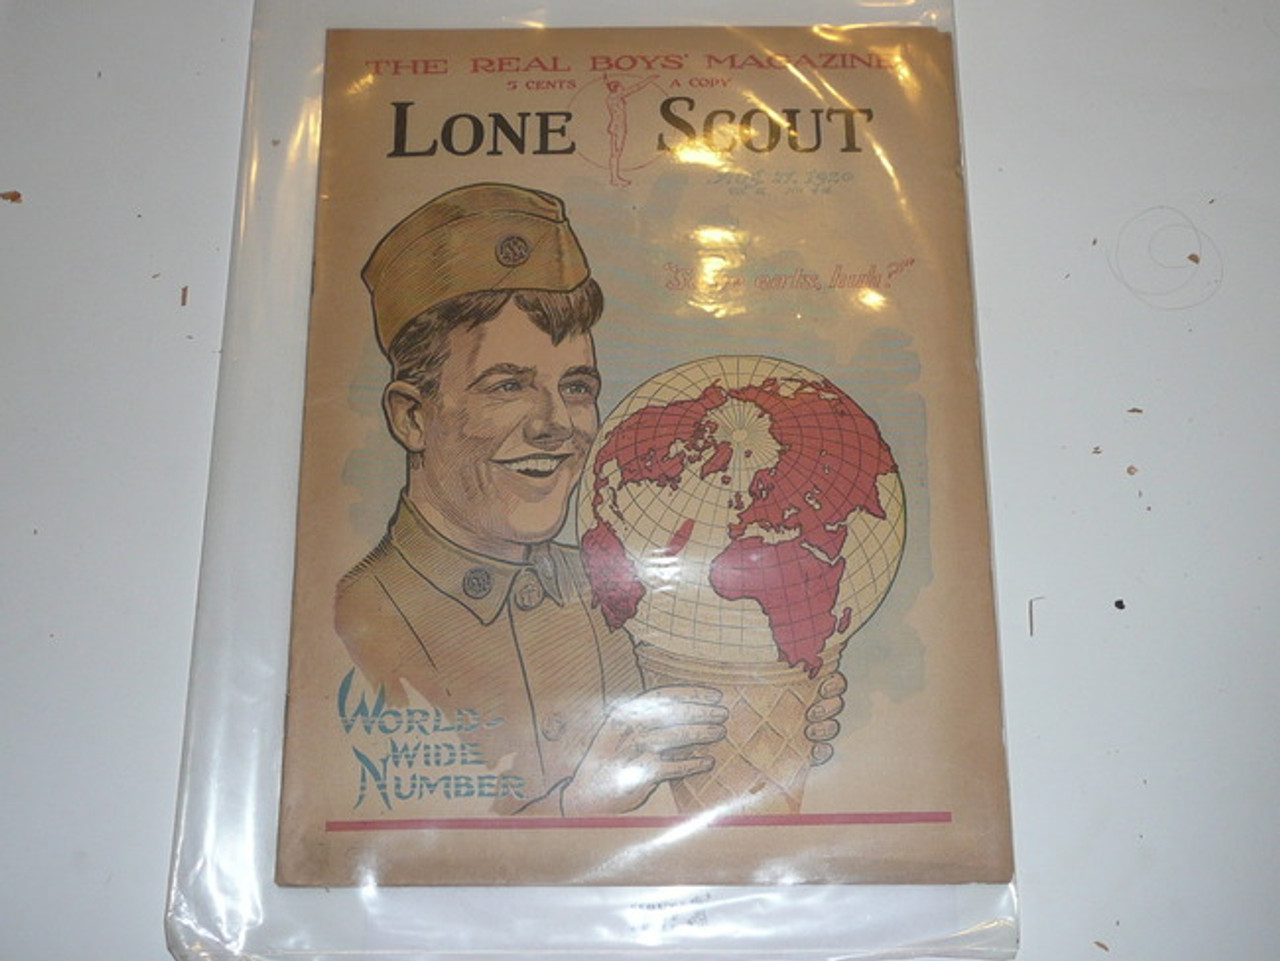 1920 Lone Scout Magazine, August 21, Vol 9 #44